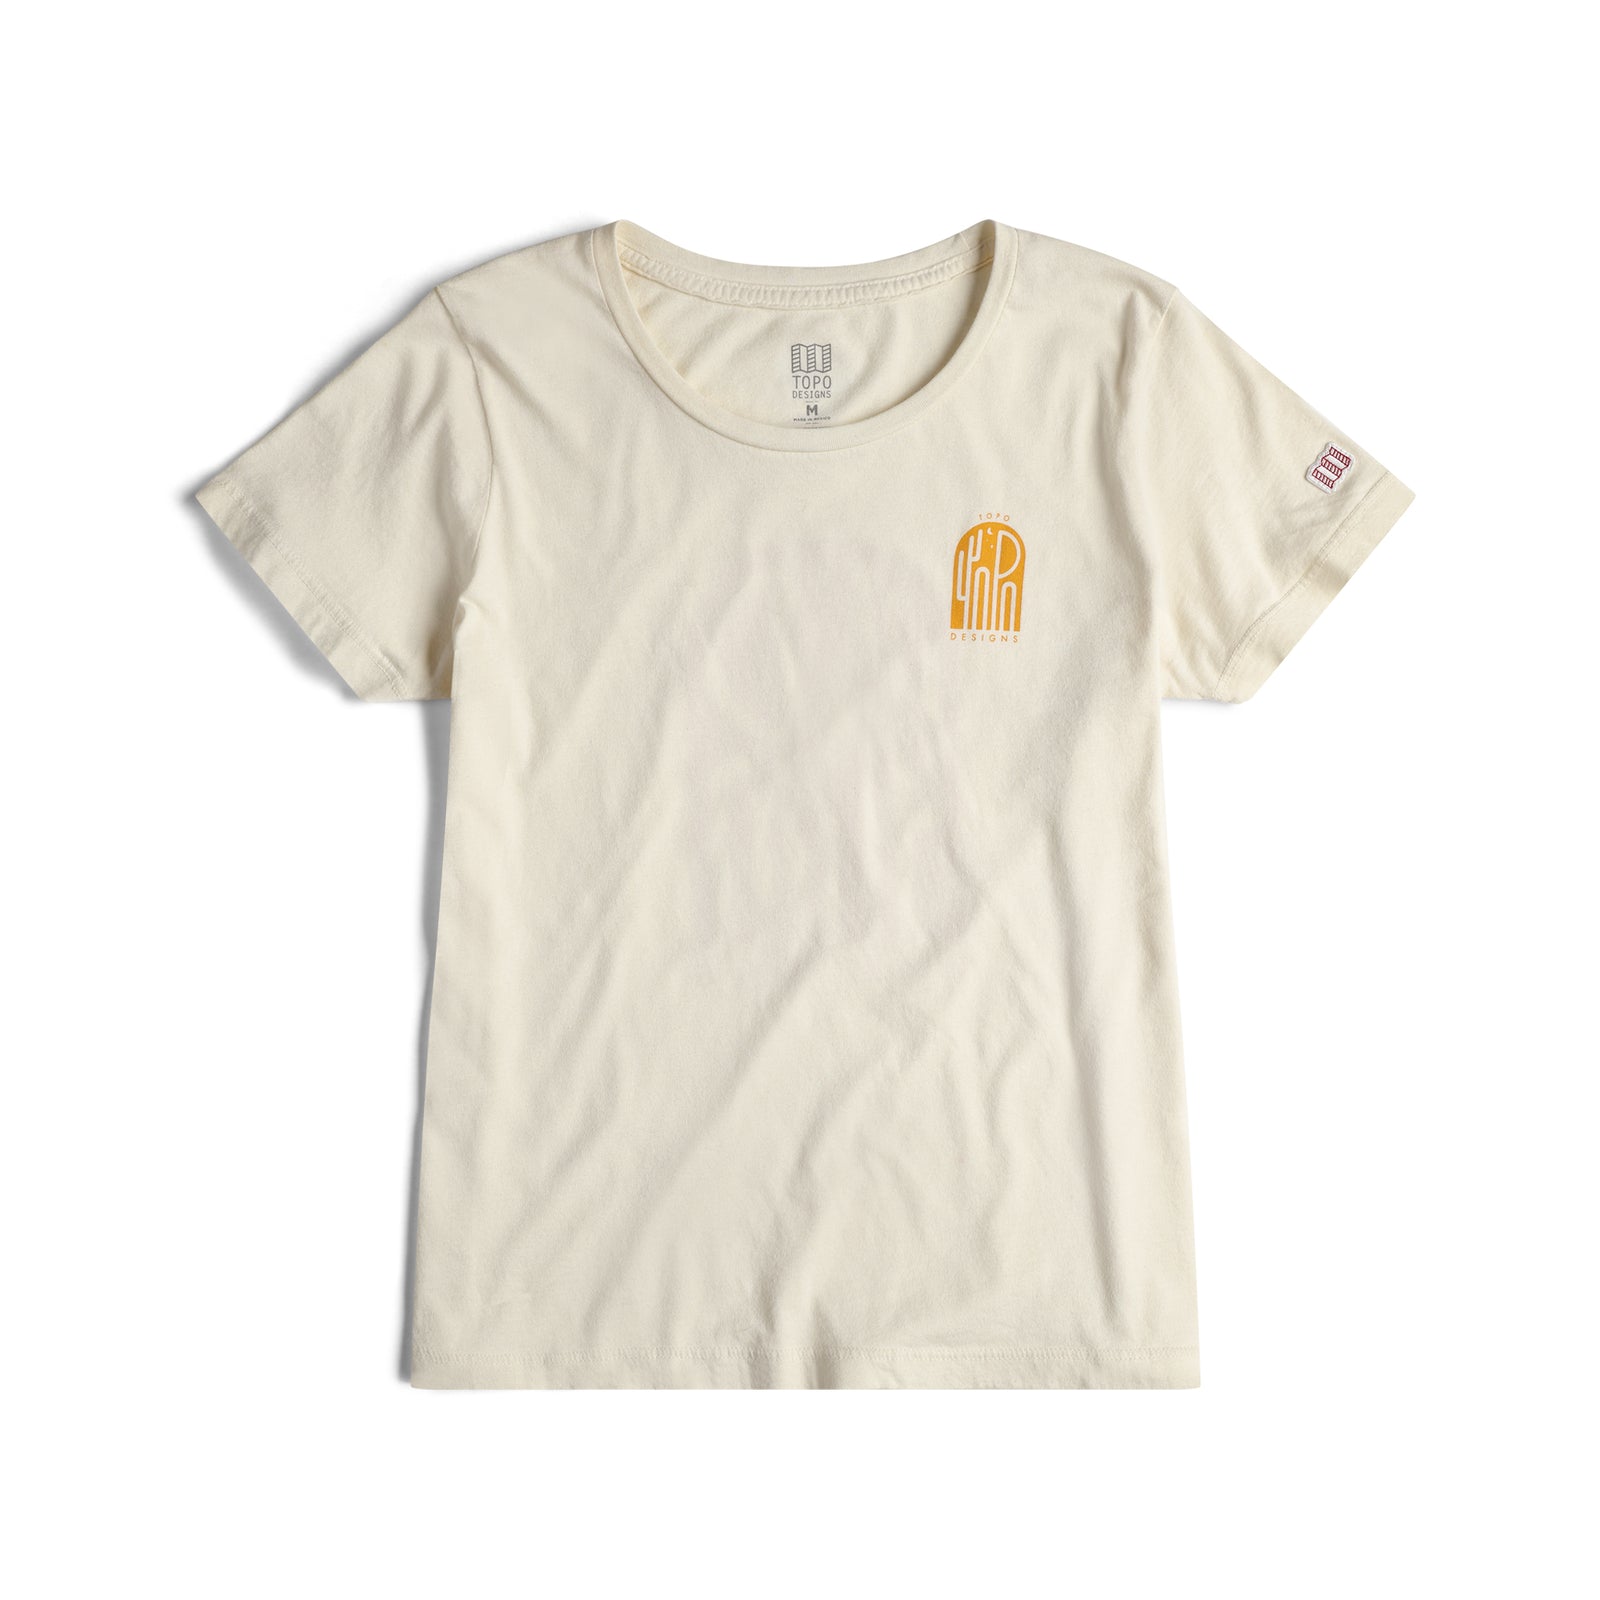 Cacti Night Tee W in "Natural"